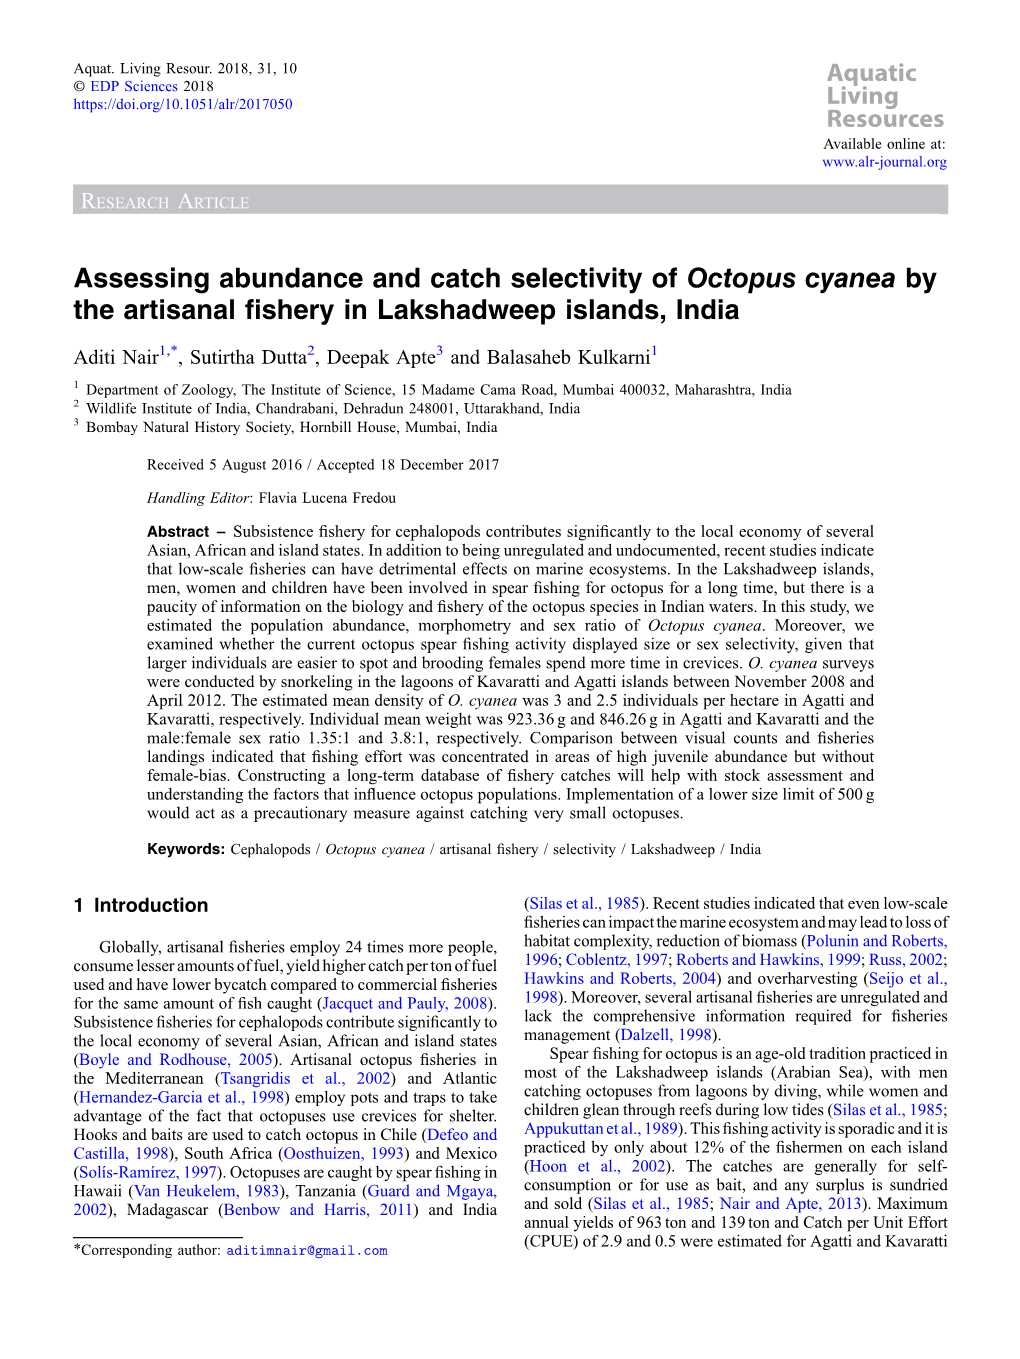 Assessing Abundance and Catch Selectivity of Octopus Cyanea by the Artisanal ﬁshery in Lakshadweep Islands, India